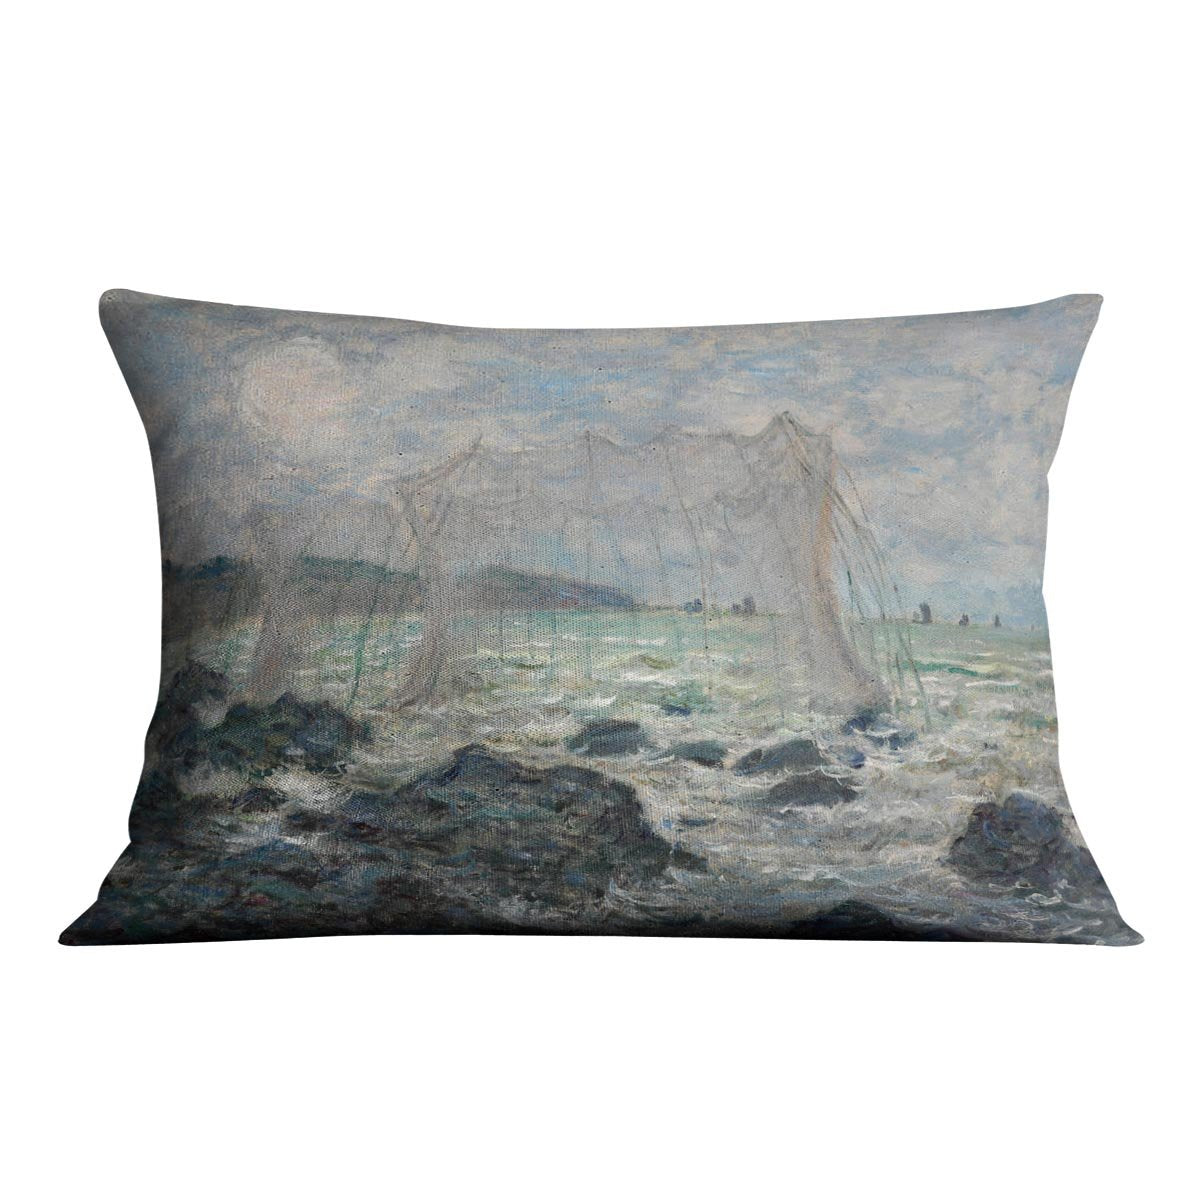 Fishing nets at Pourville by Monet Throw Pillow